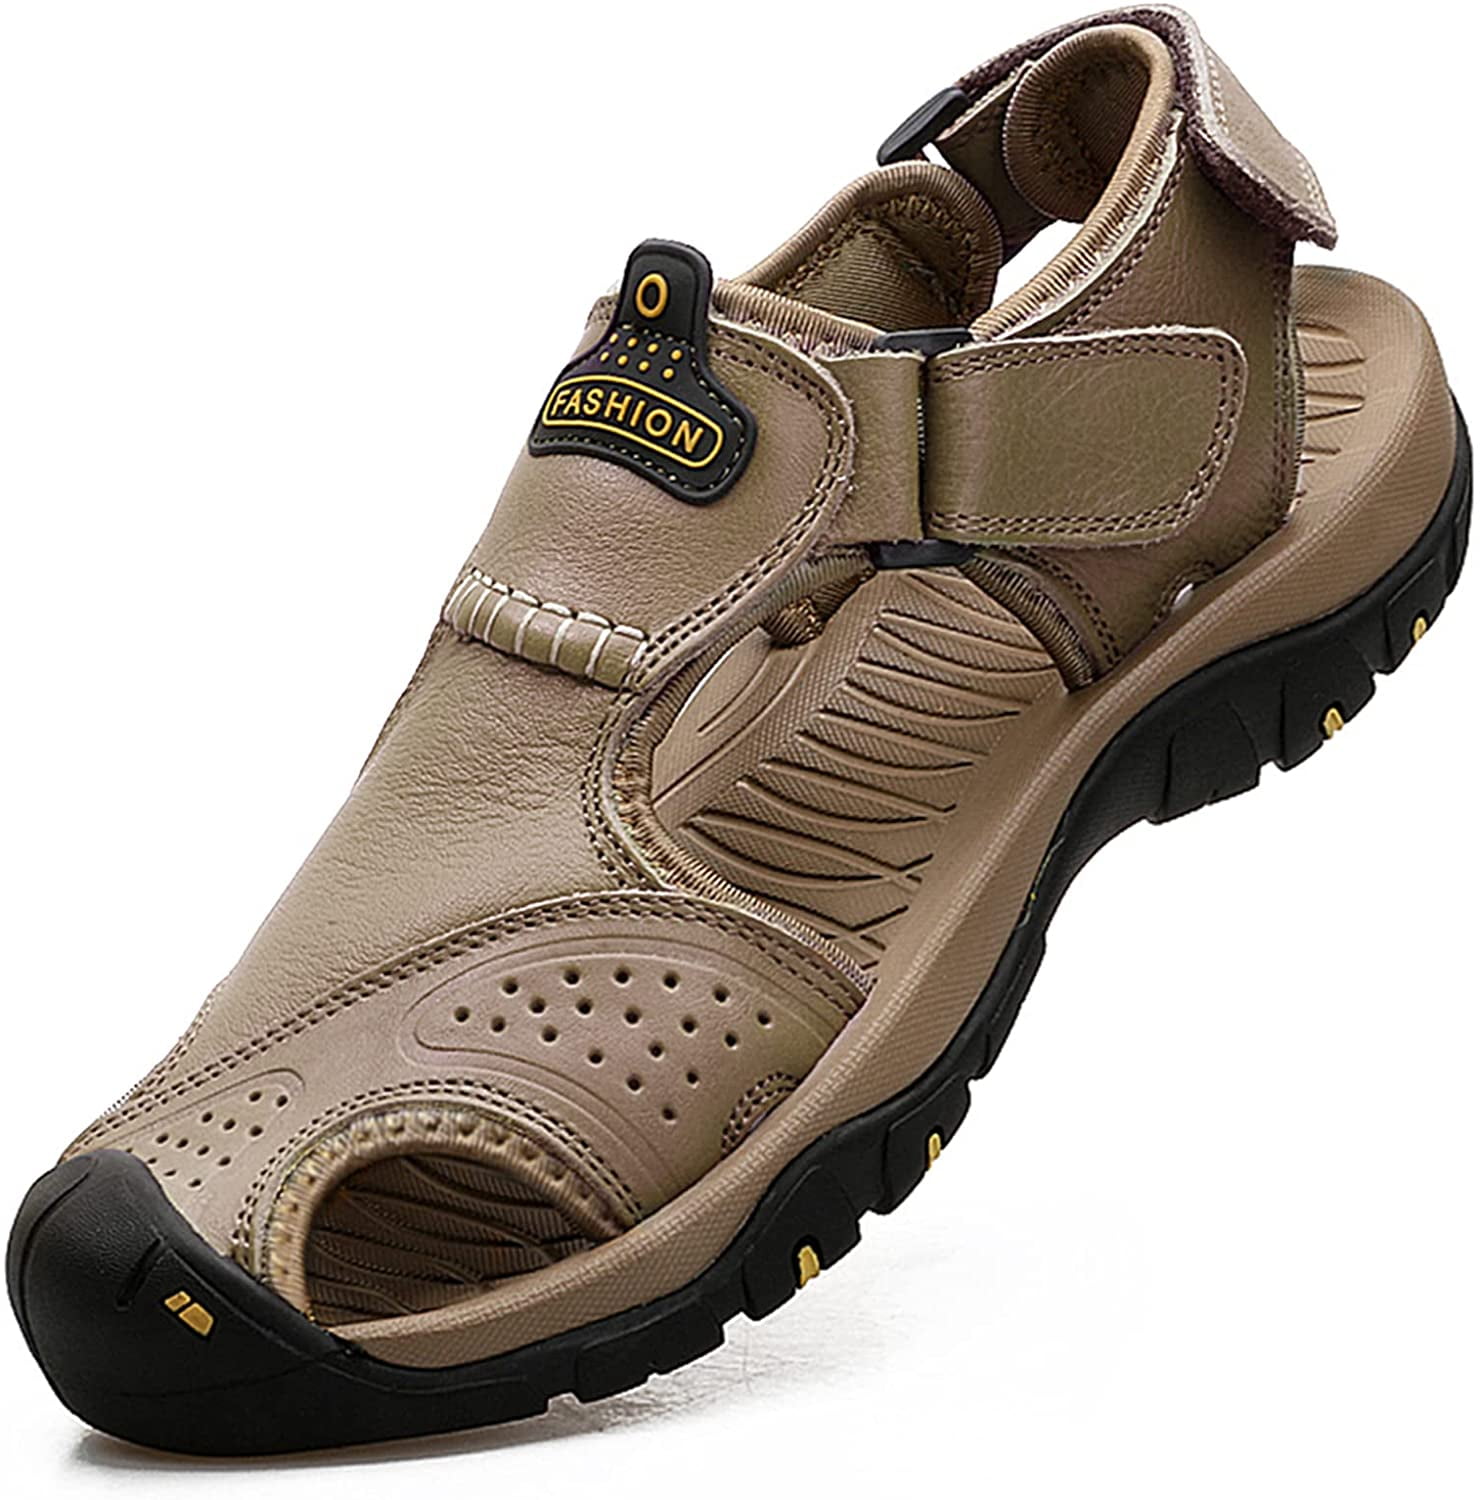 CAMEL Mens Sport Sandals Waterproof Outdoor Open Toe Sandal Athletic Beach Shoes With Three Straps For Summer Hiking 